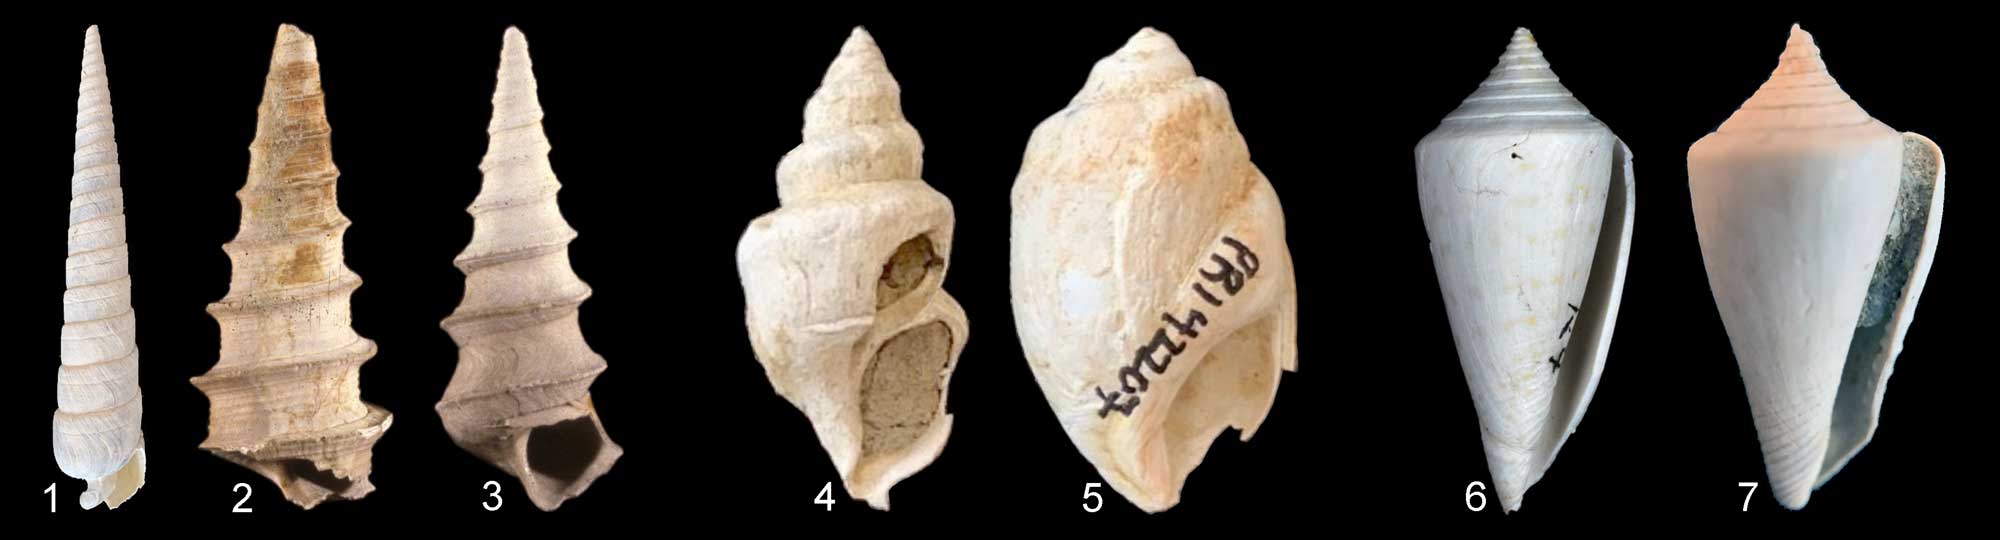 Image showing photographs of seven fossil gastropod shells that show varying types of convergence of form.